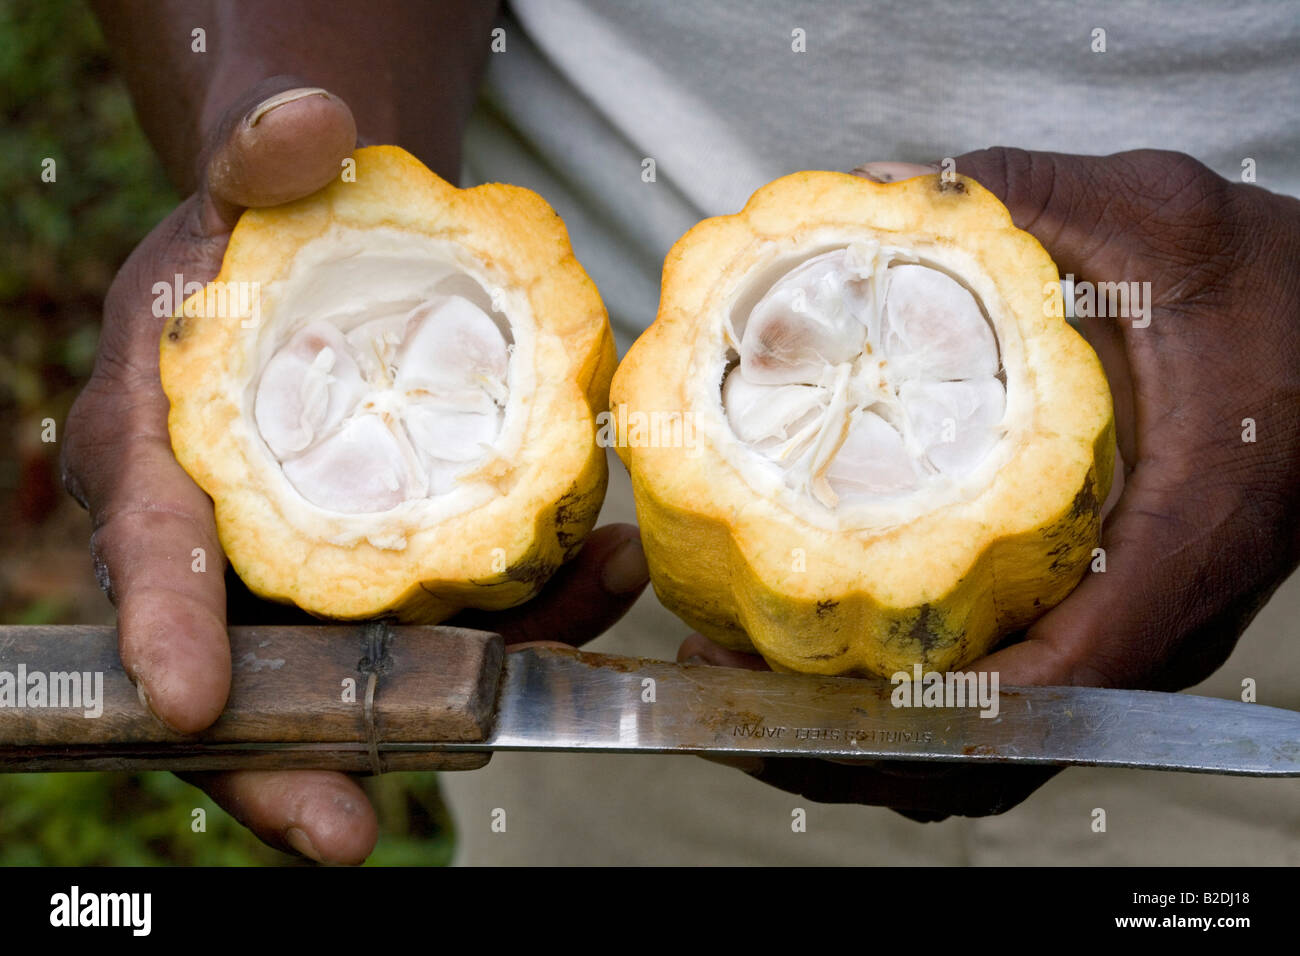 Cocoa pod Theobroma cacao cut open exposing the beans inside Dominica West Indies Stock Photo